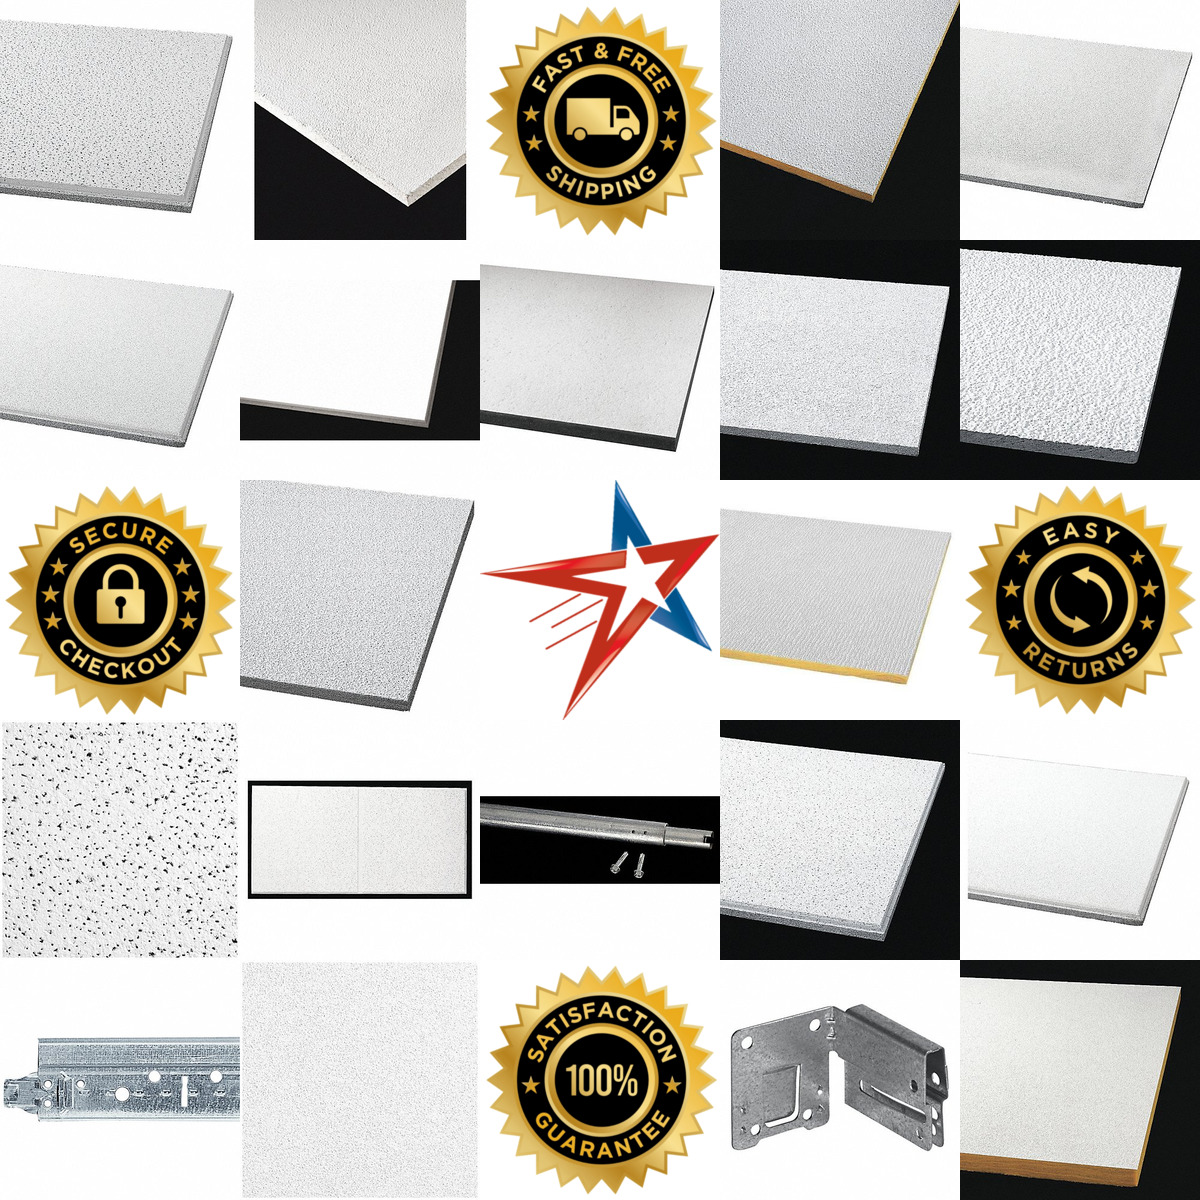 A selection of Ceiling Tiles and Accessories products on GoVets